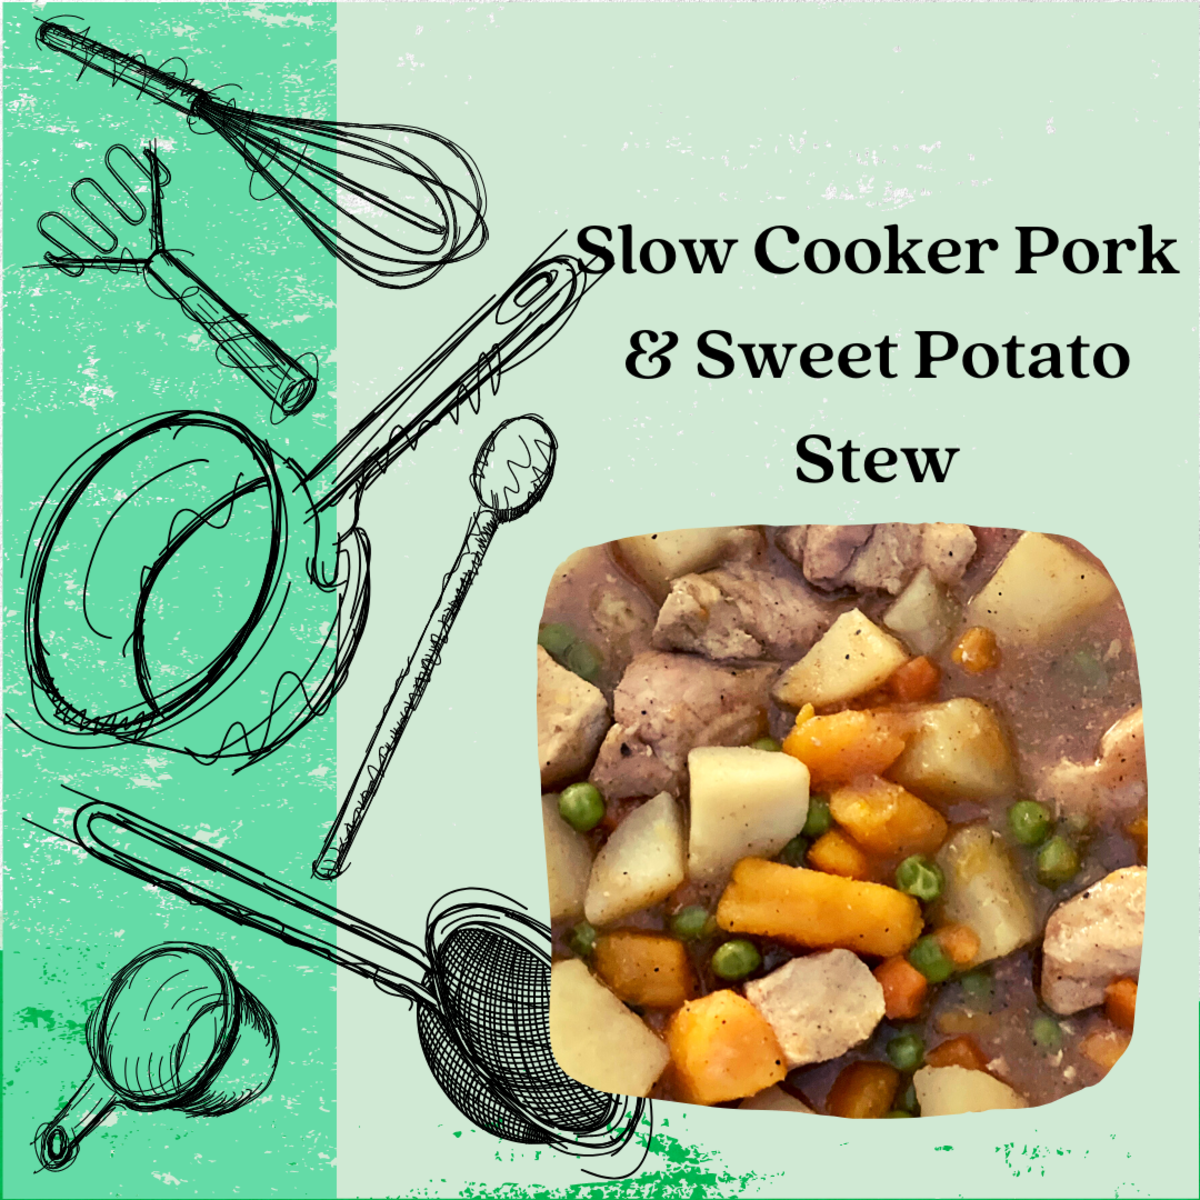 Slow Cooker Pork and Sweet Potato Stew